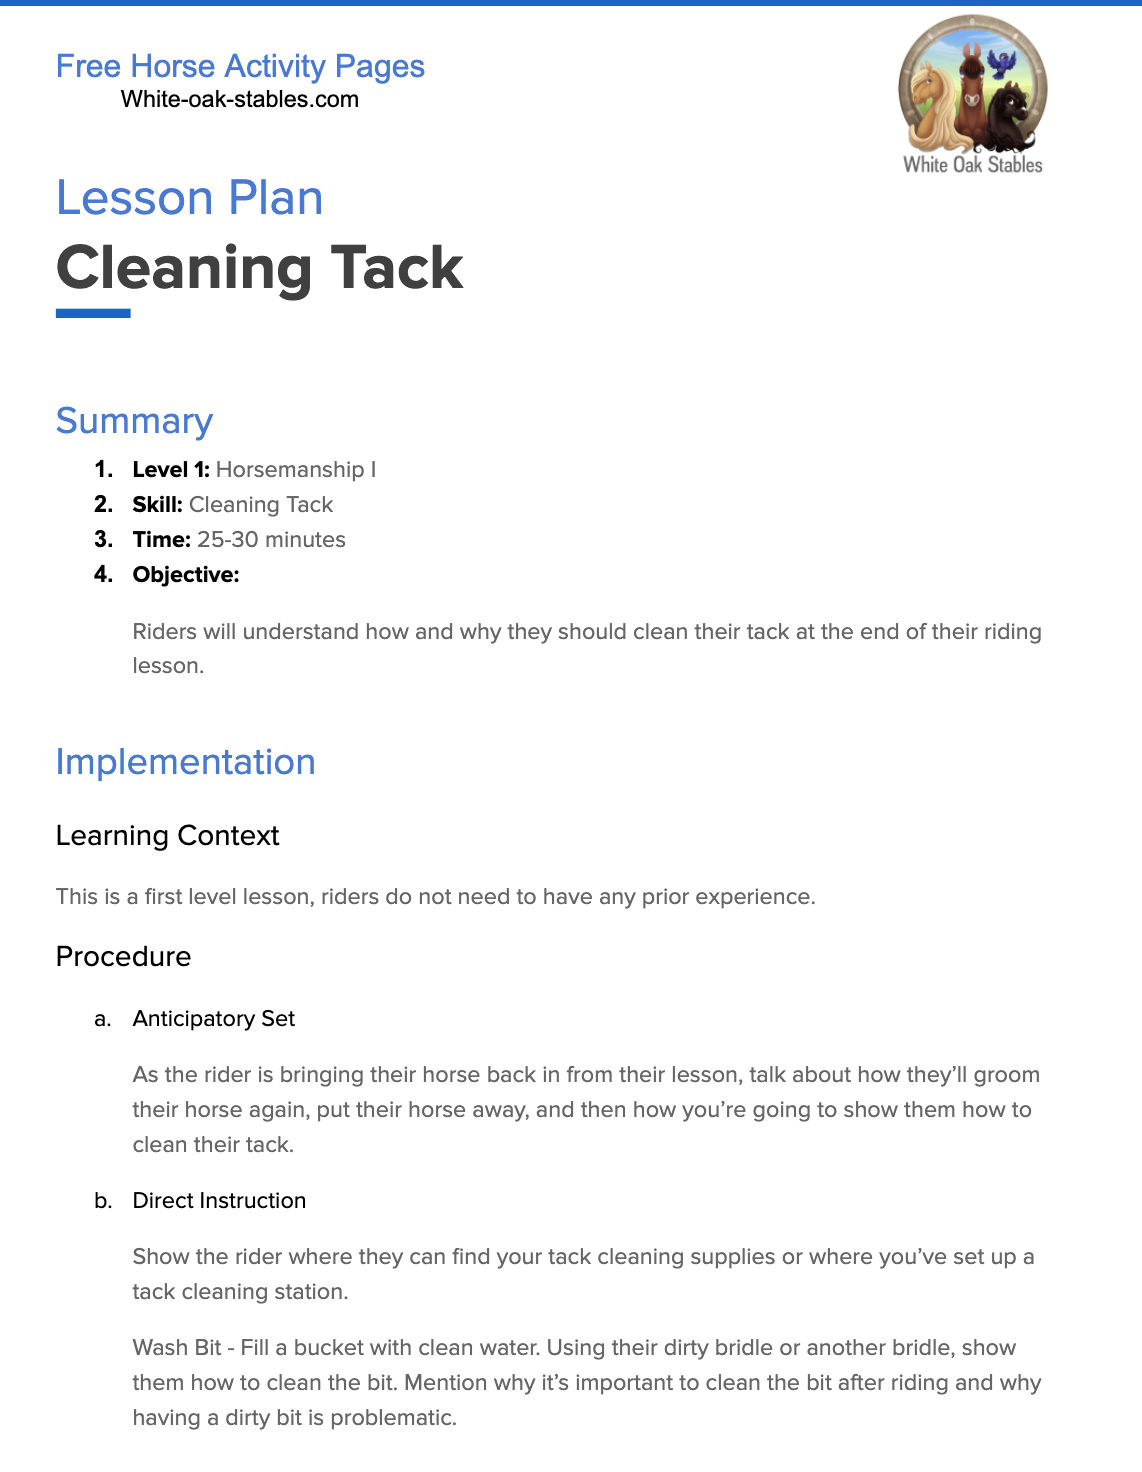 Lesson Plan – Cleaning Tack